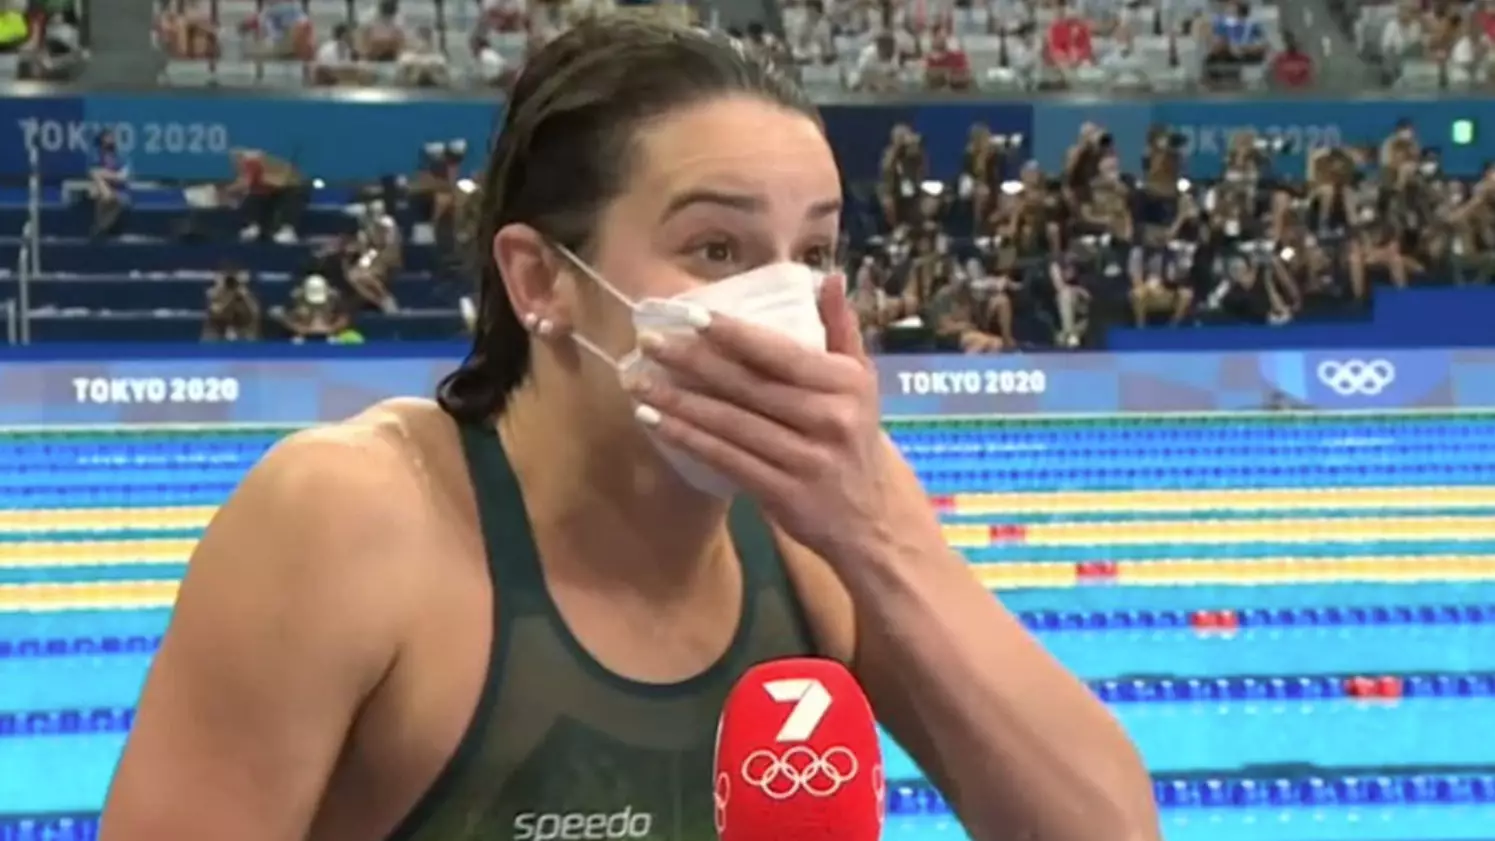 'F**k Yeah': Aussie Swimmer Gives X-Rated Answer During Interview After Winning Olympic Gold